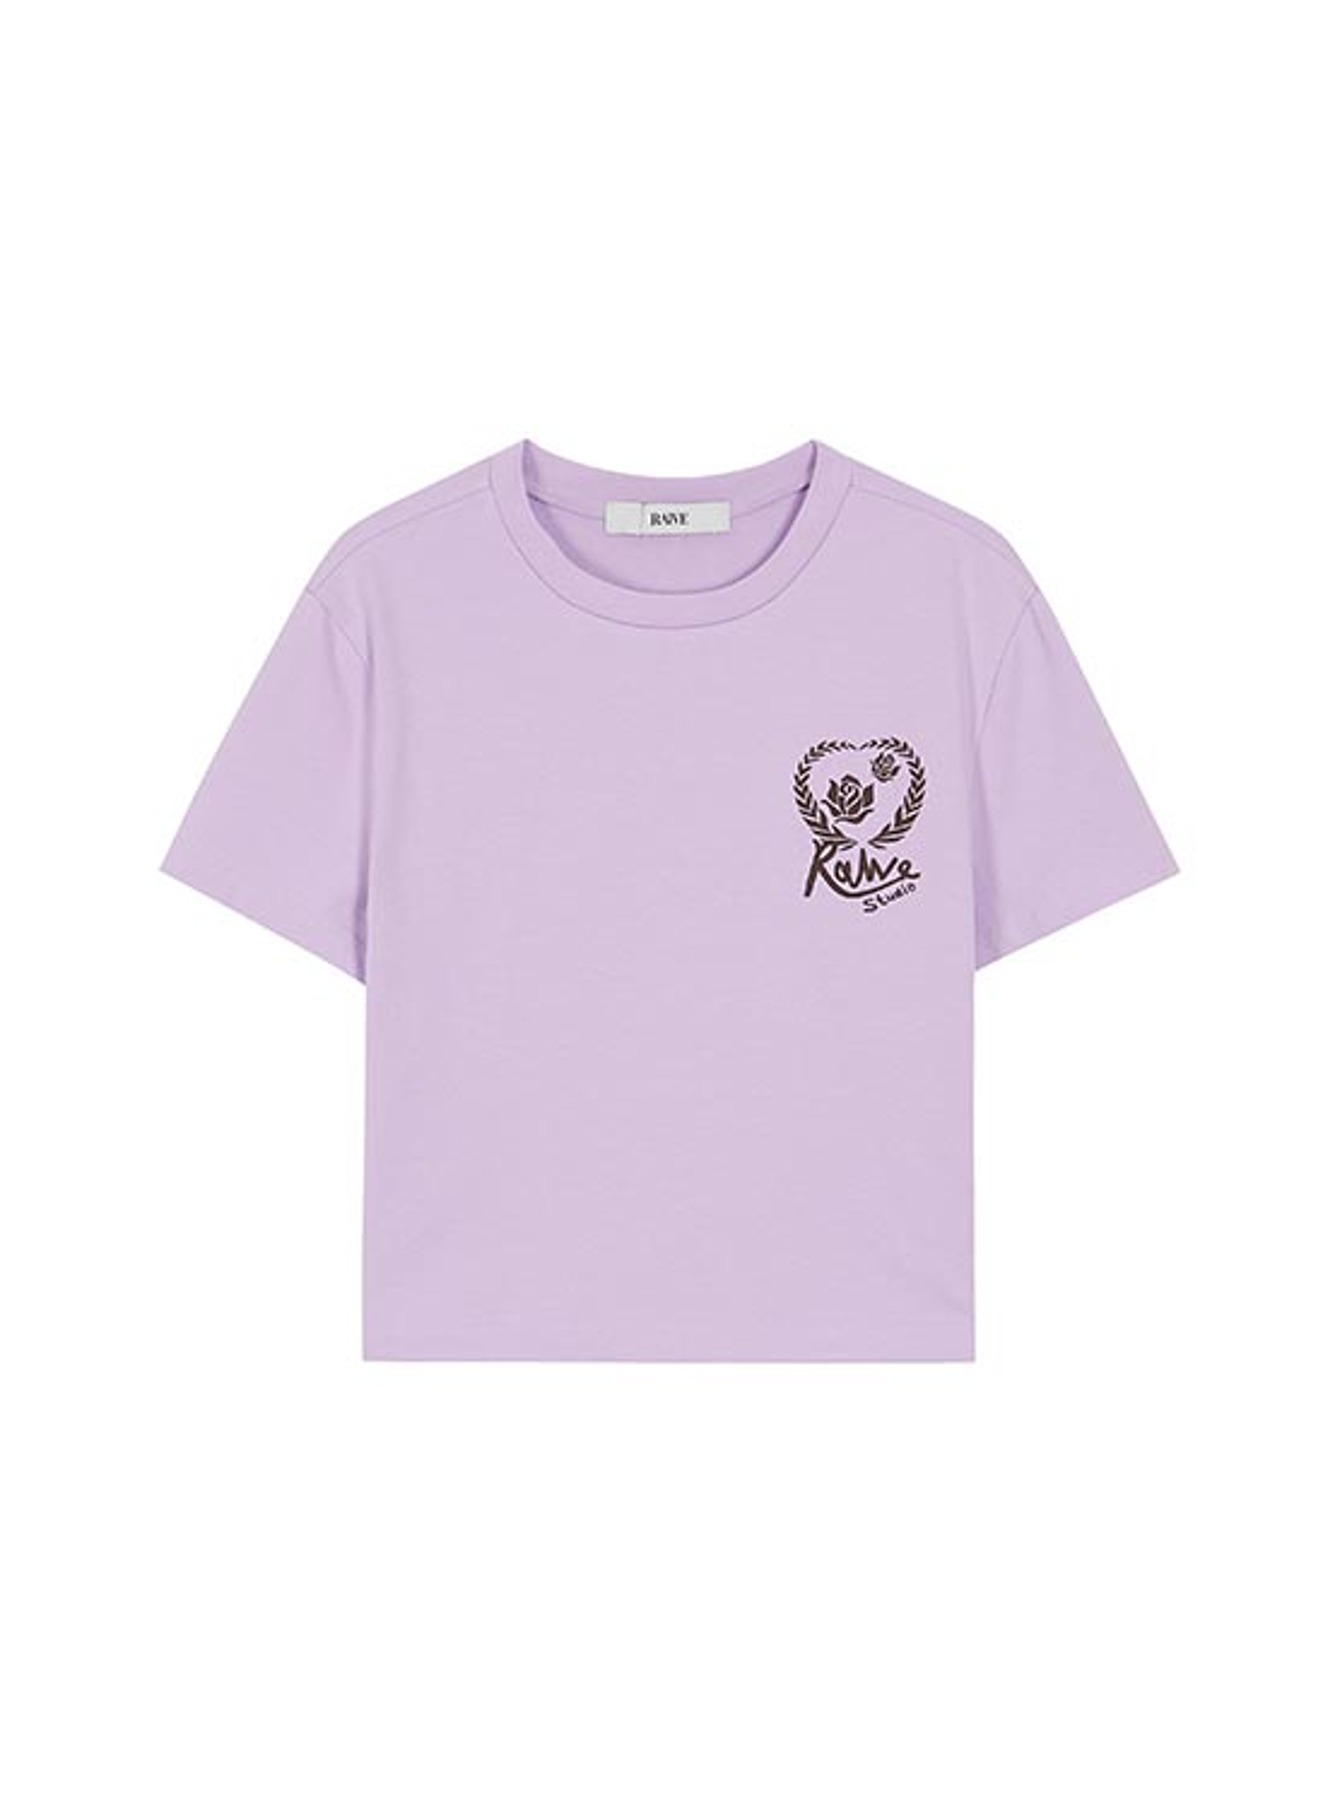 Small Heart Graphic T-Shirt in Purple VW3ME264-82